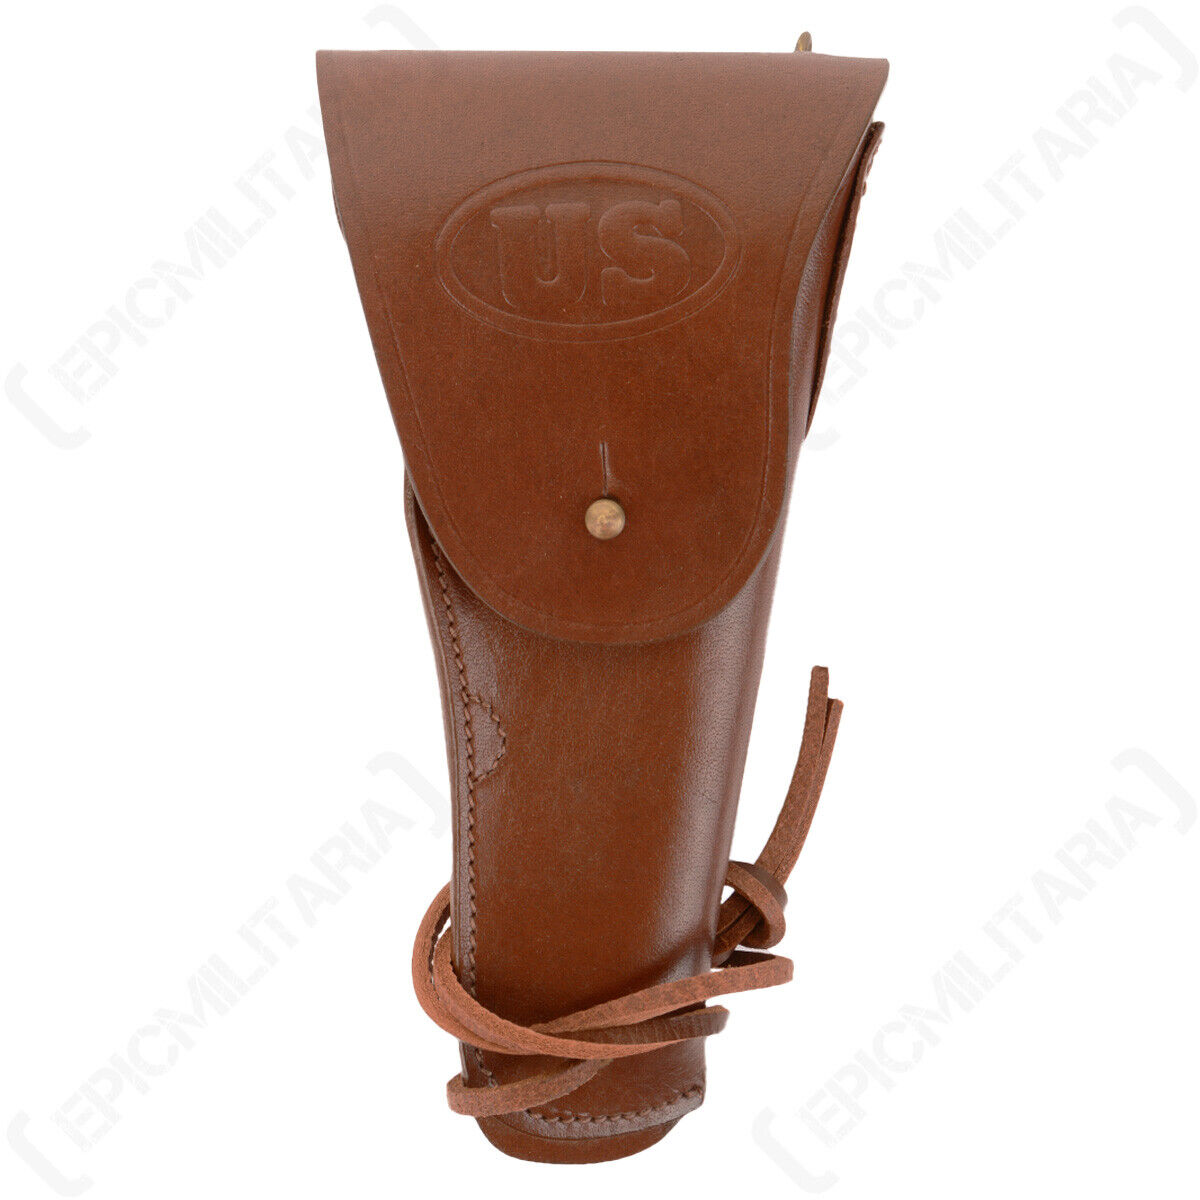 WW1 WW2 US M1916 Colt Pistol Holster - Brown Leather Brass American Army Repro